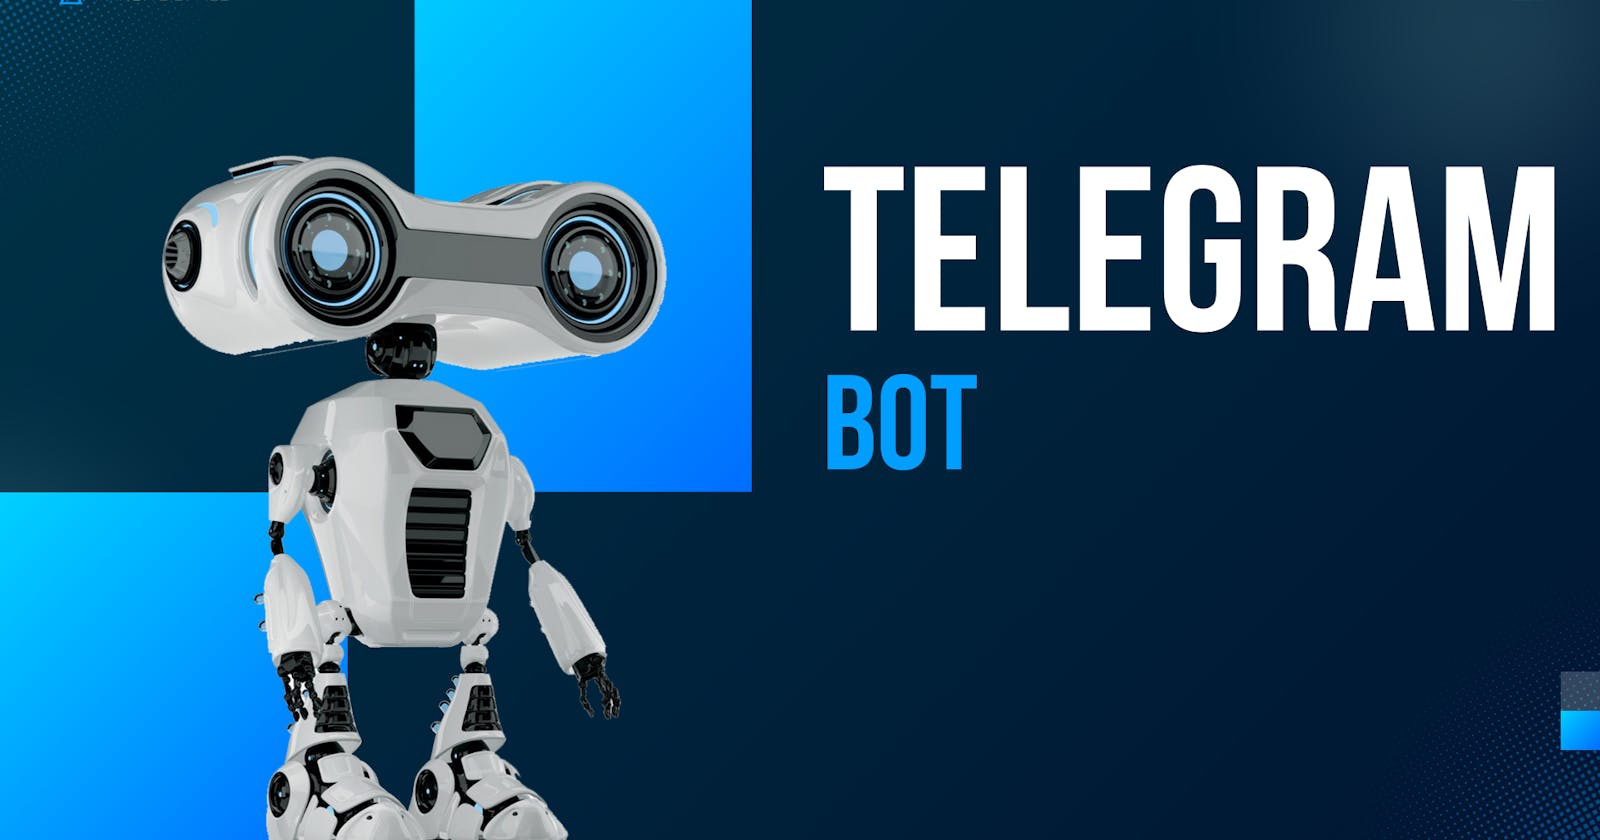 Find out how to build a Telegram Bot using python